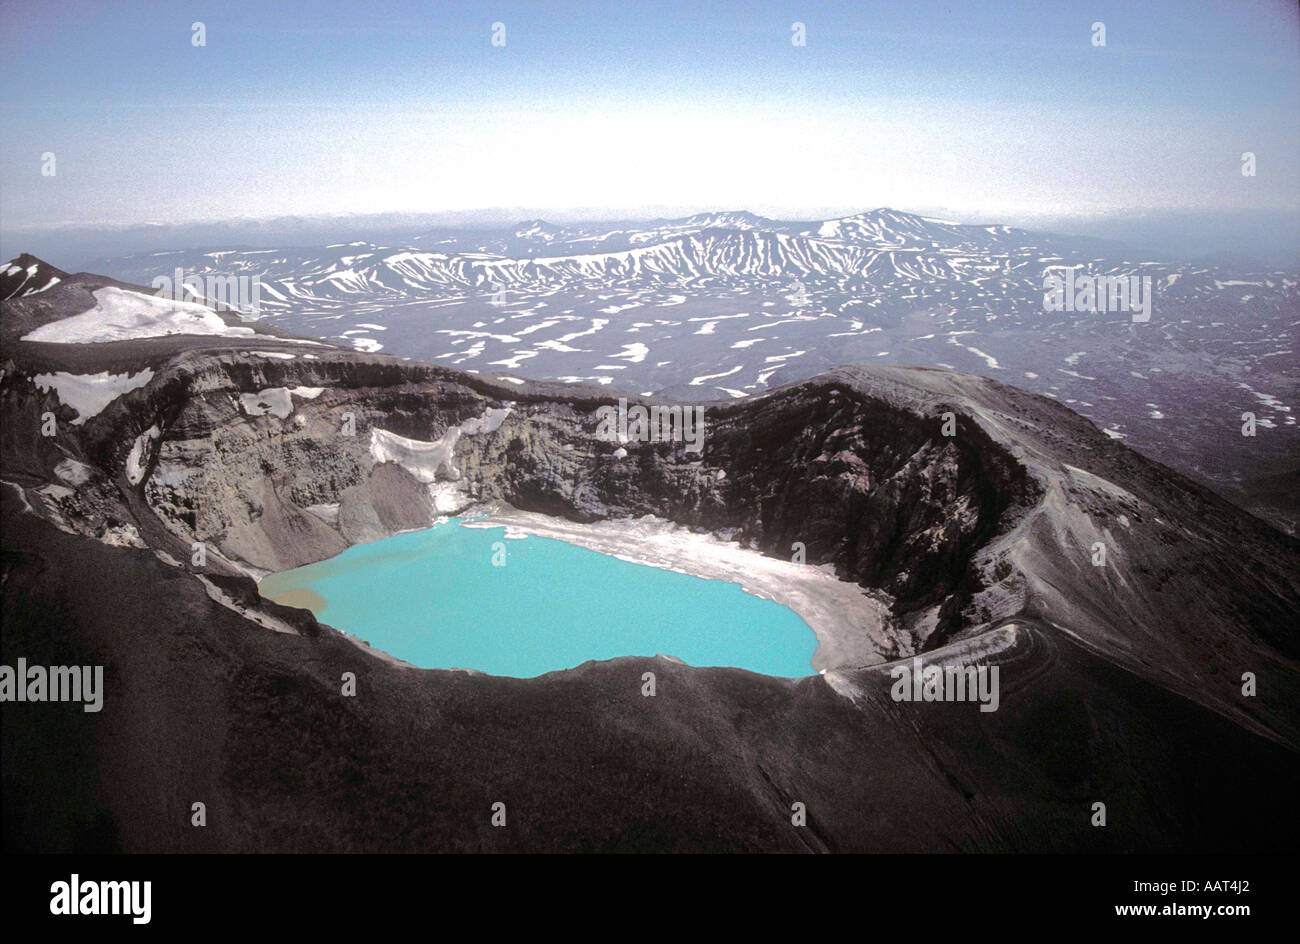 Mali Semyachik Volcanic crater filled with turquoise acidic lake in Kamchatcka Stock Photo